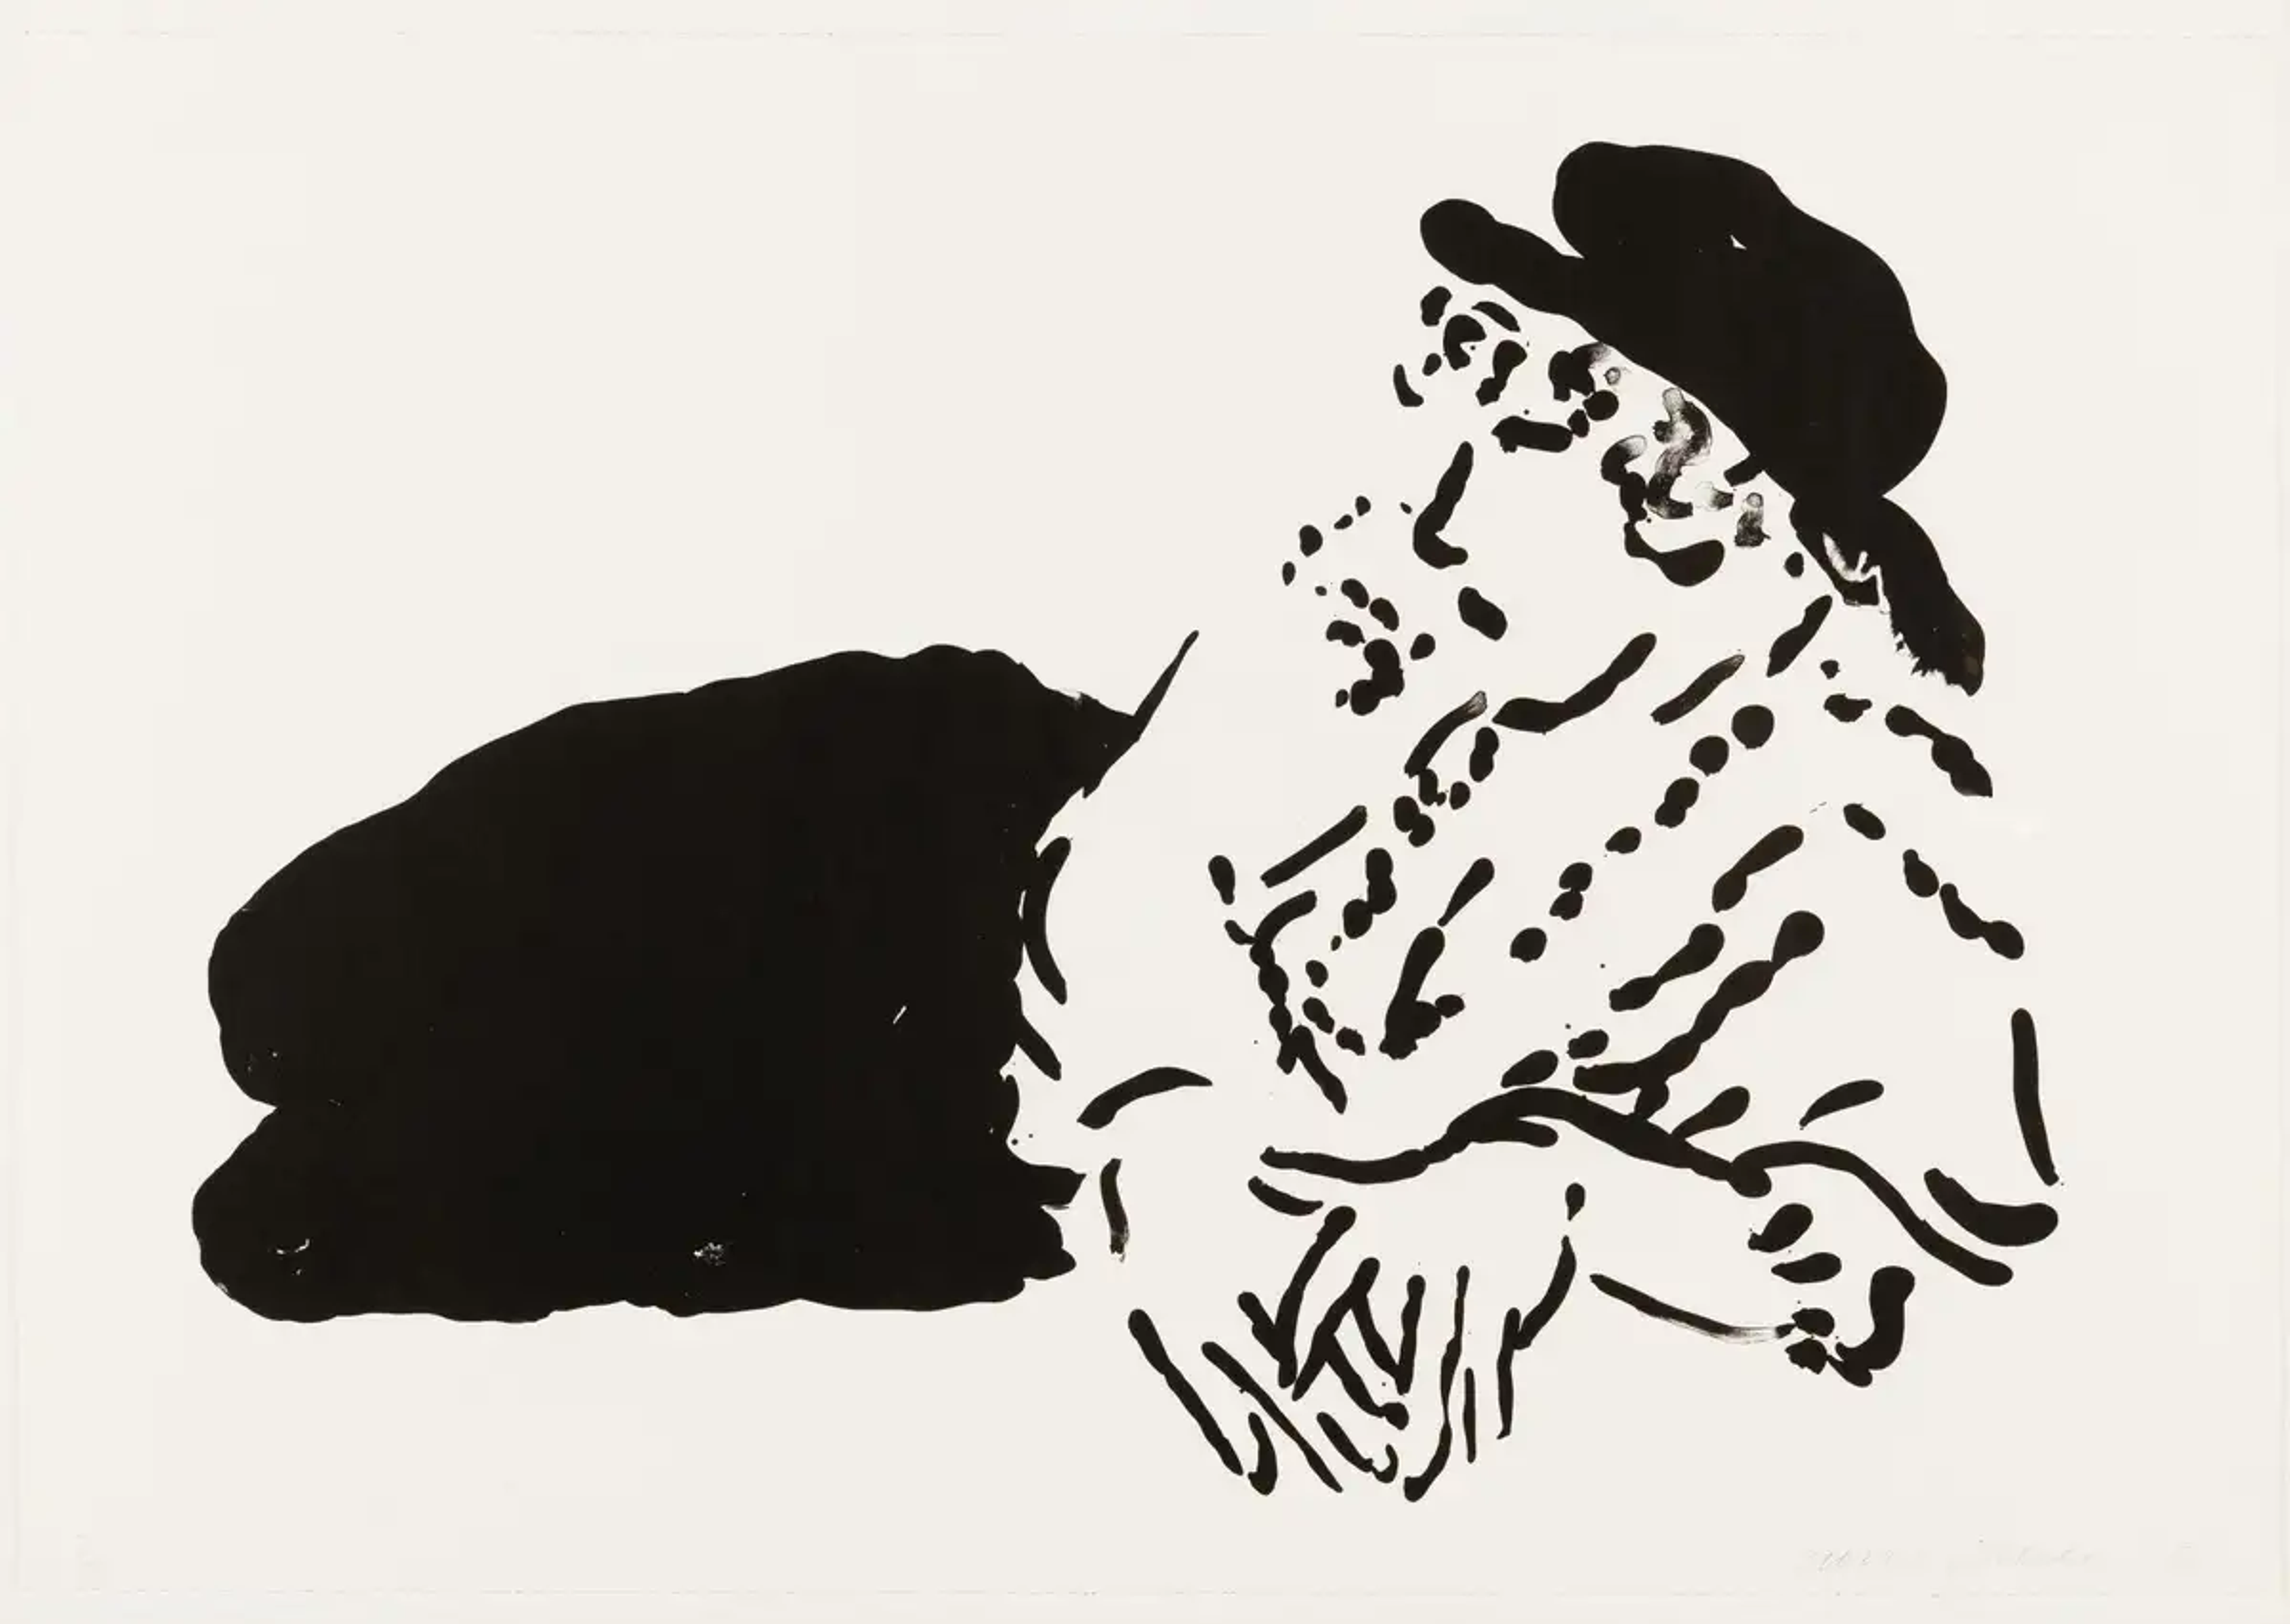 This print by David Hockney shows Celia Birtwell reclining. She is depicted in a monochrome style in loose brushwork, wearing a black hat and skirt and white blouse.